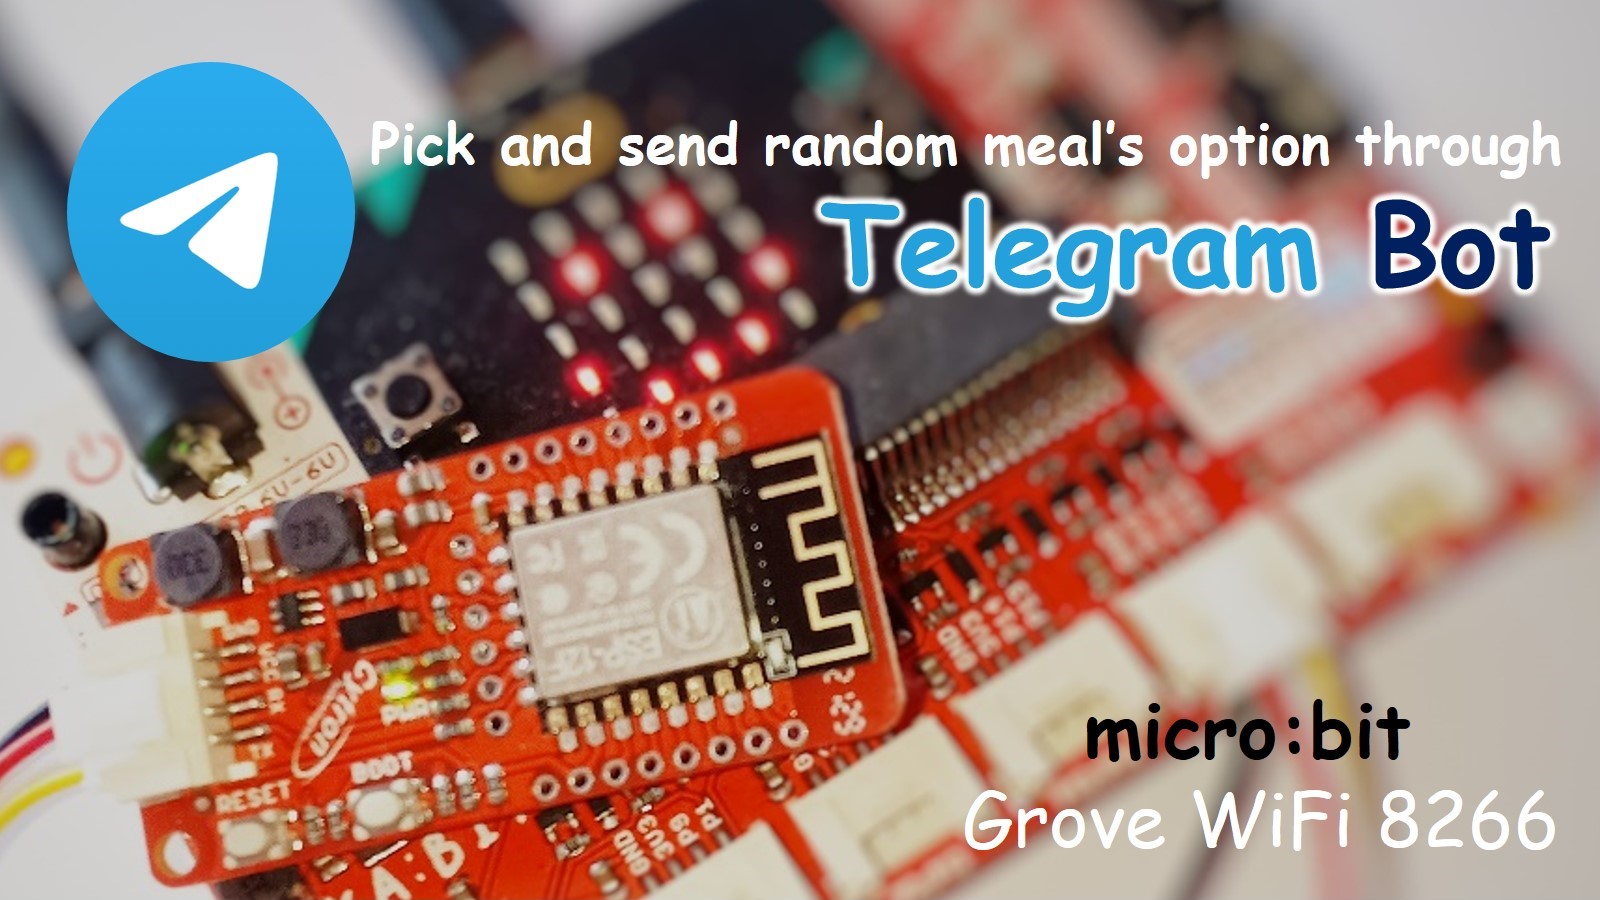 Send Meal Selection and Locations through Telegram Bot Using ESP8266 Grove WiFi Module on micro:bit